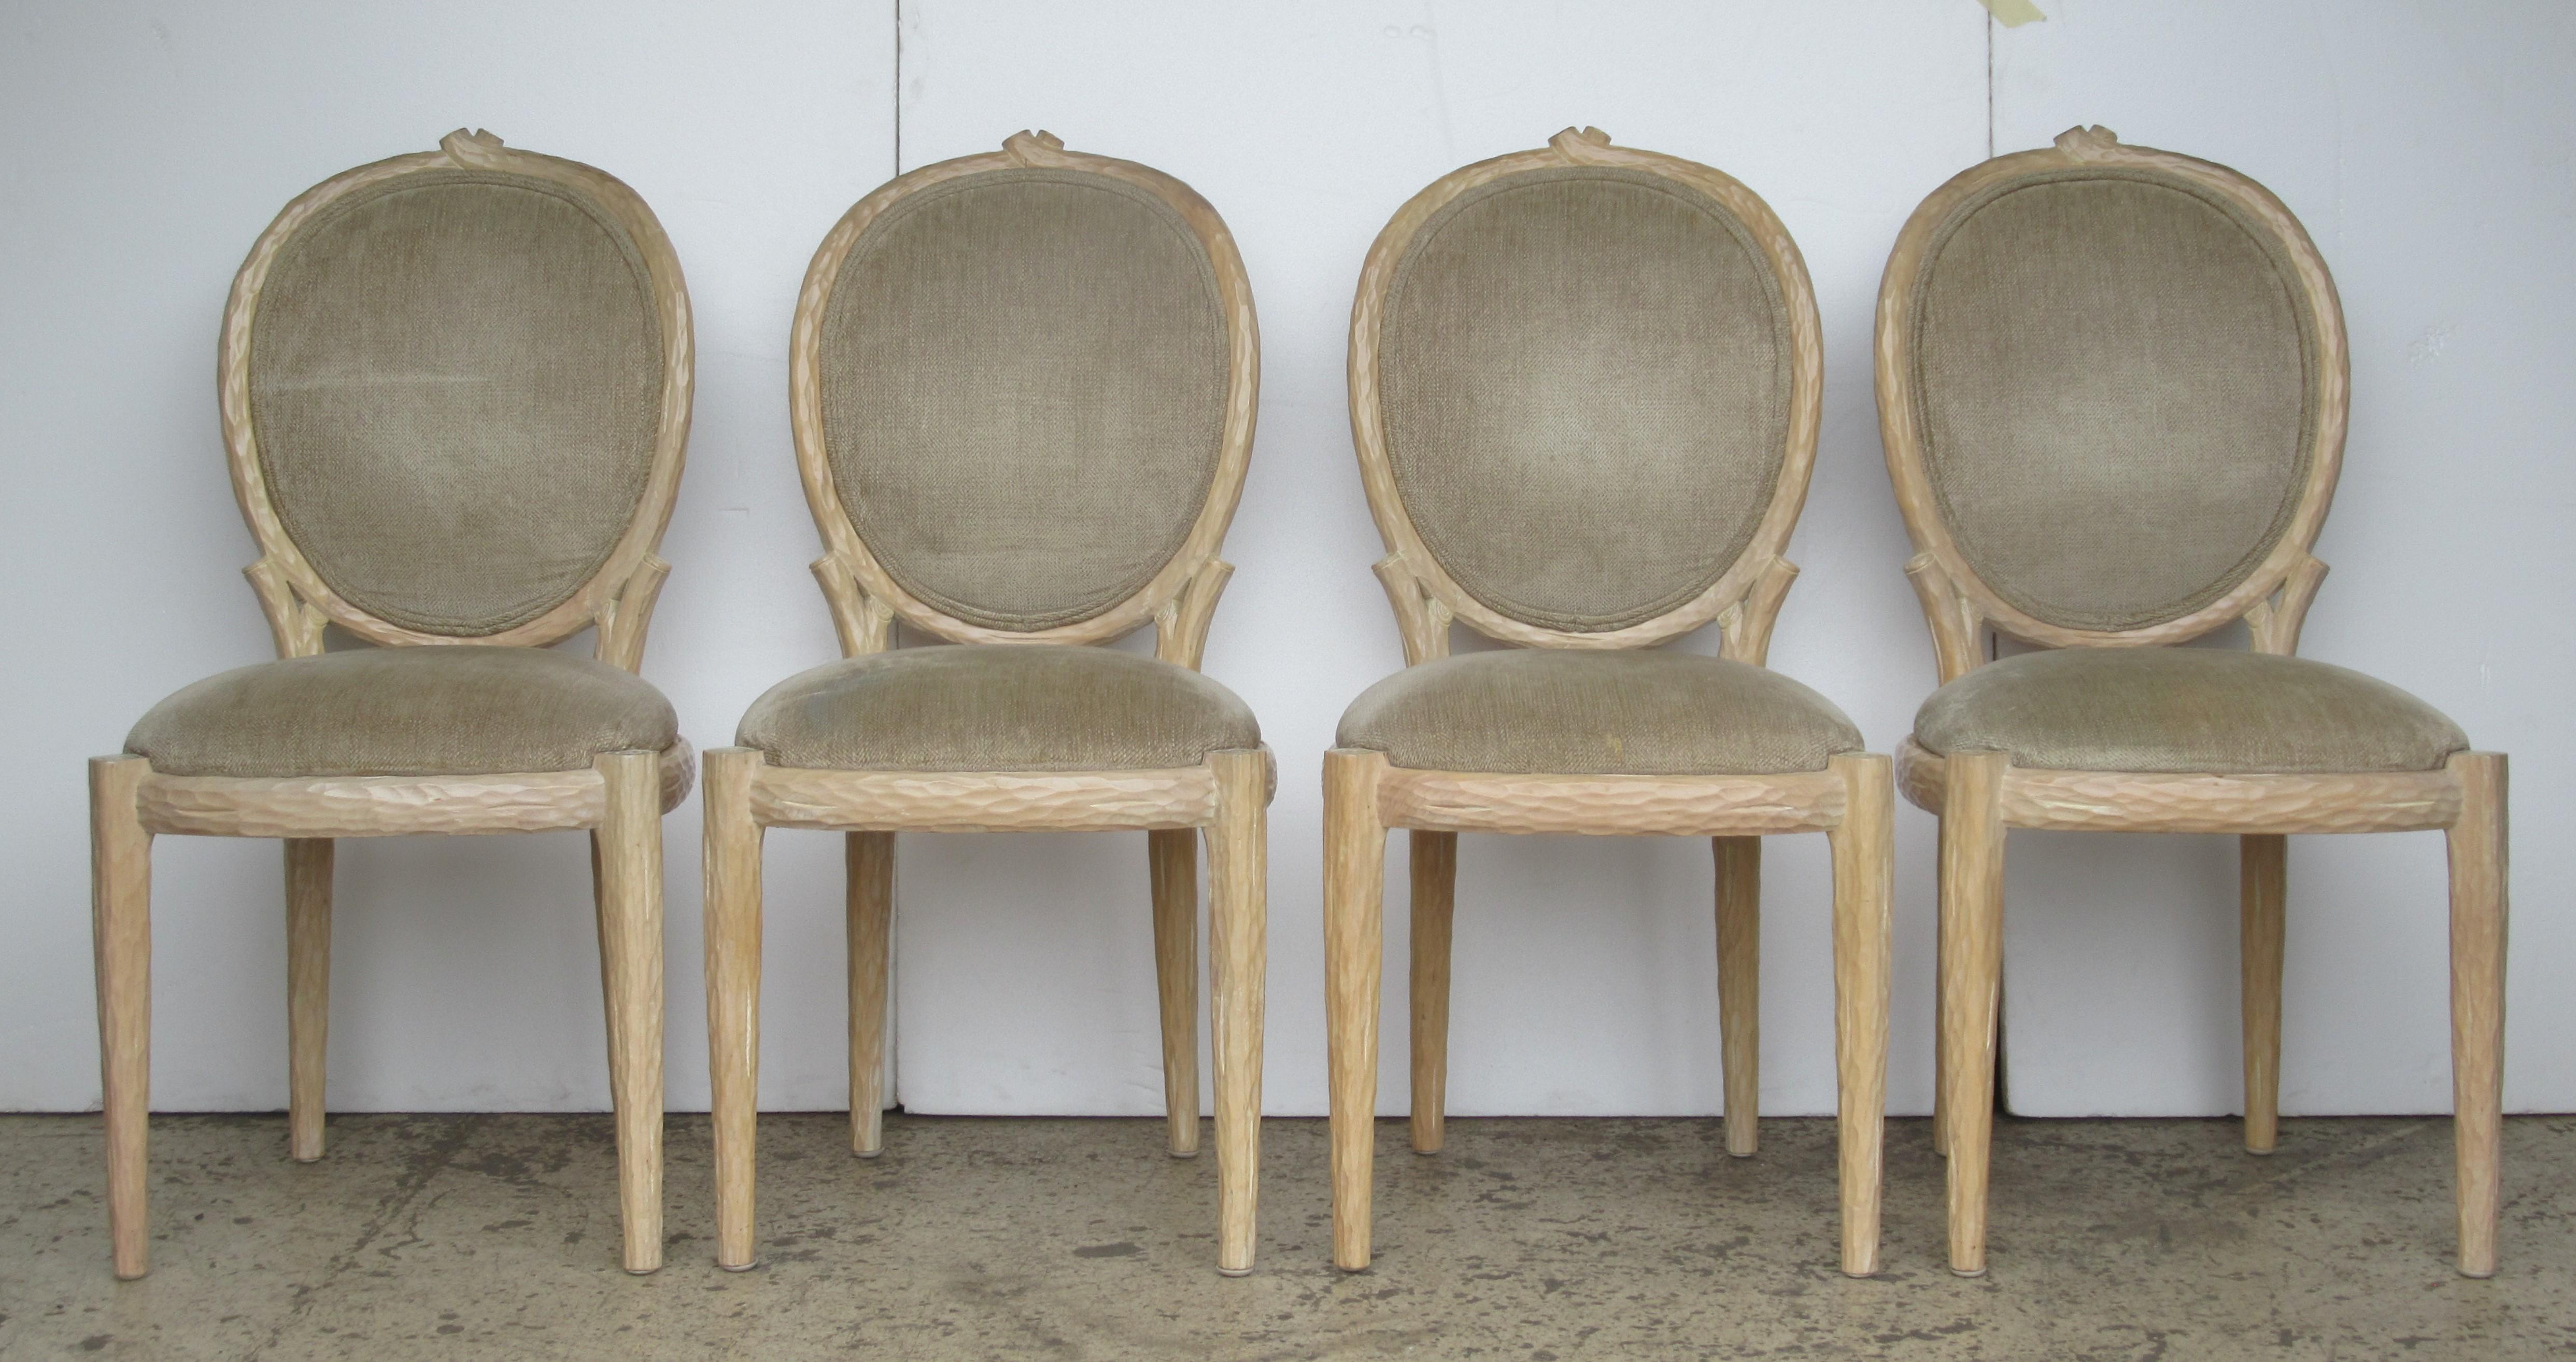 Set of four carved wood faux bois twig form dining or side chairs in beautifully aged subtle white washed vellum colored finish. Italian - circa 1970s. See all pictures.